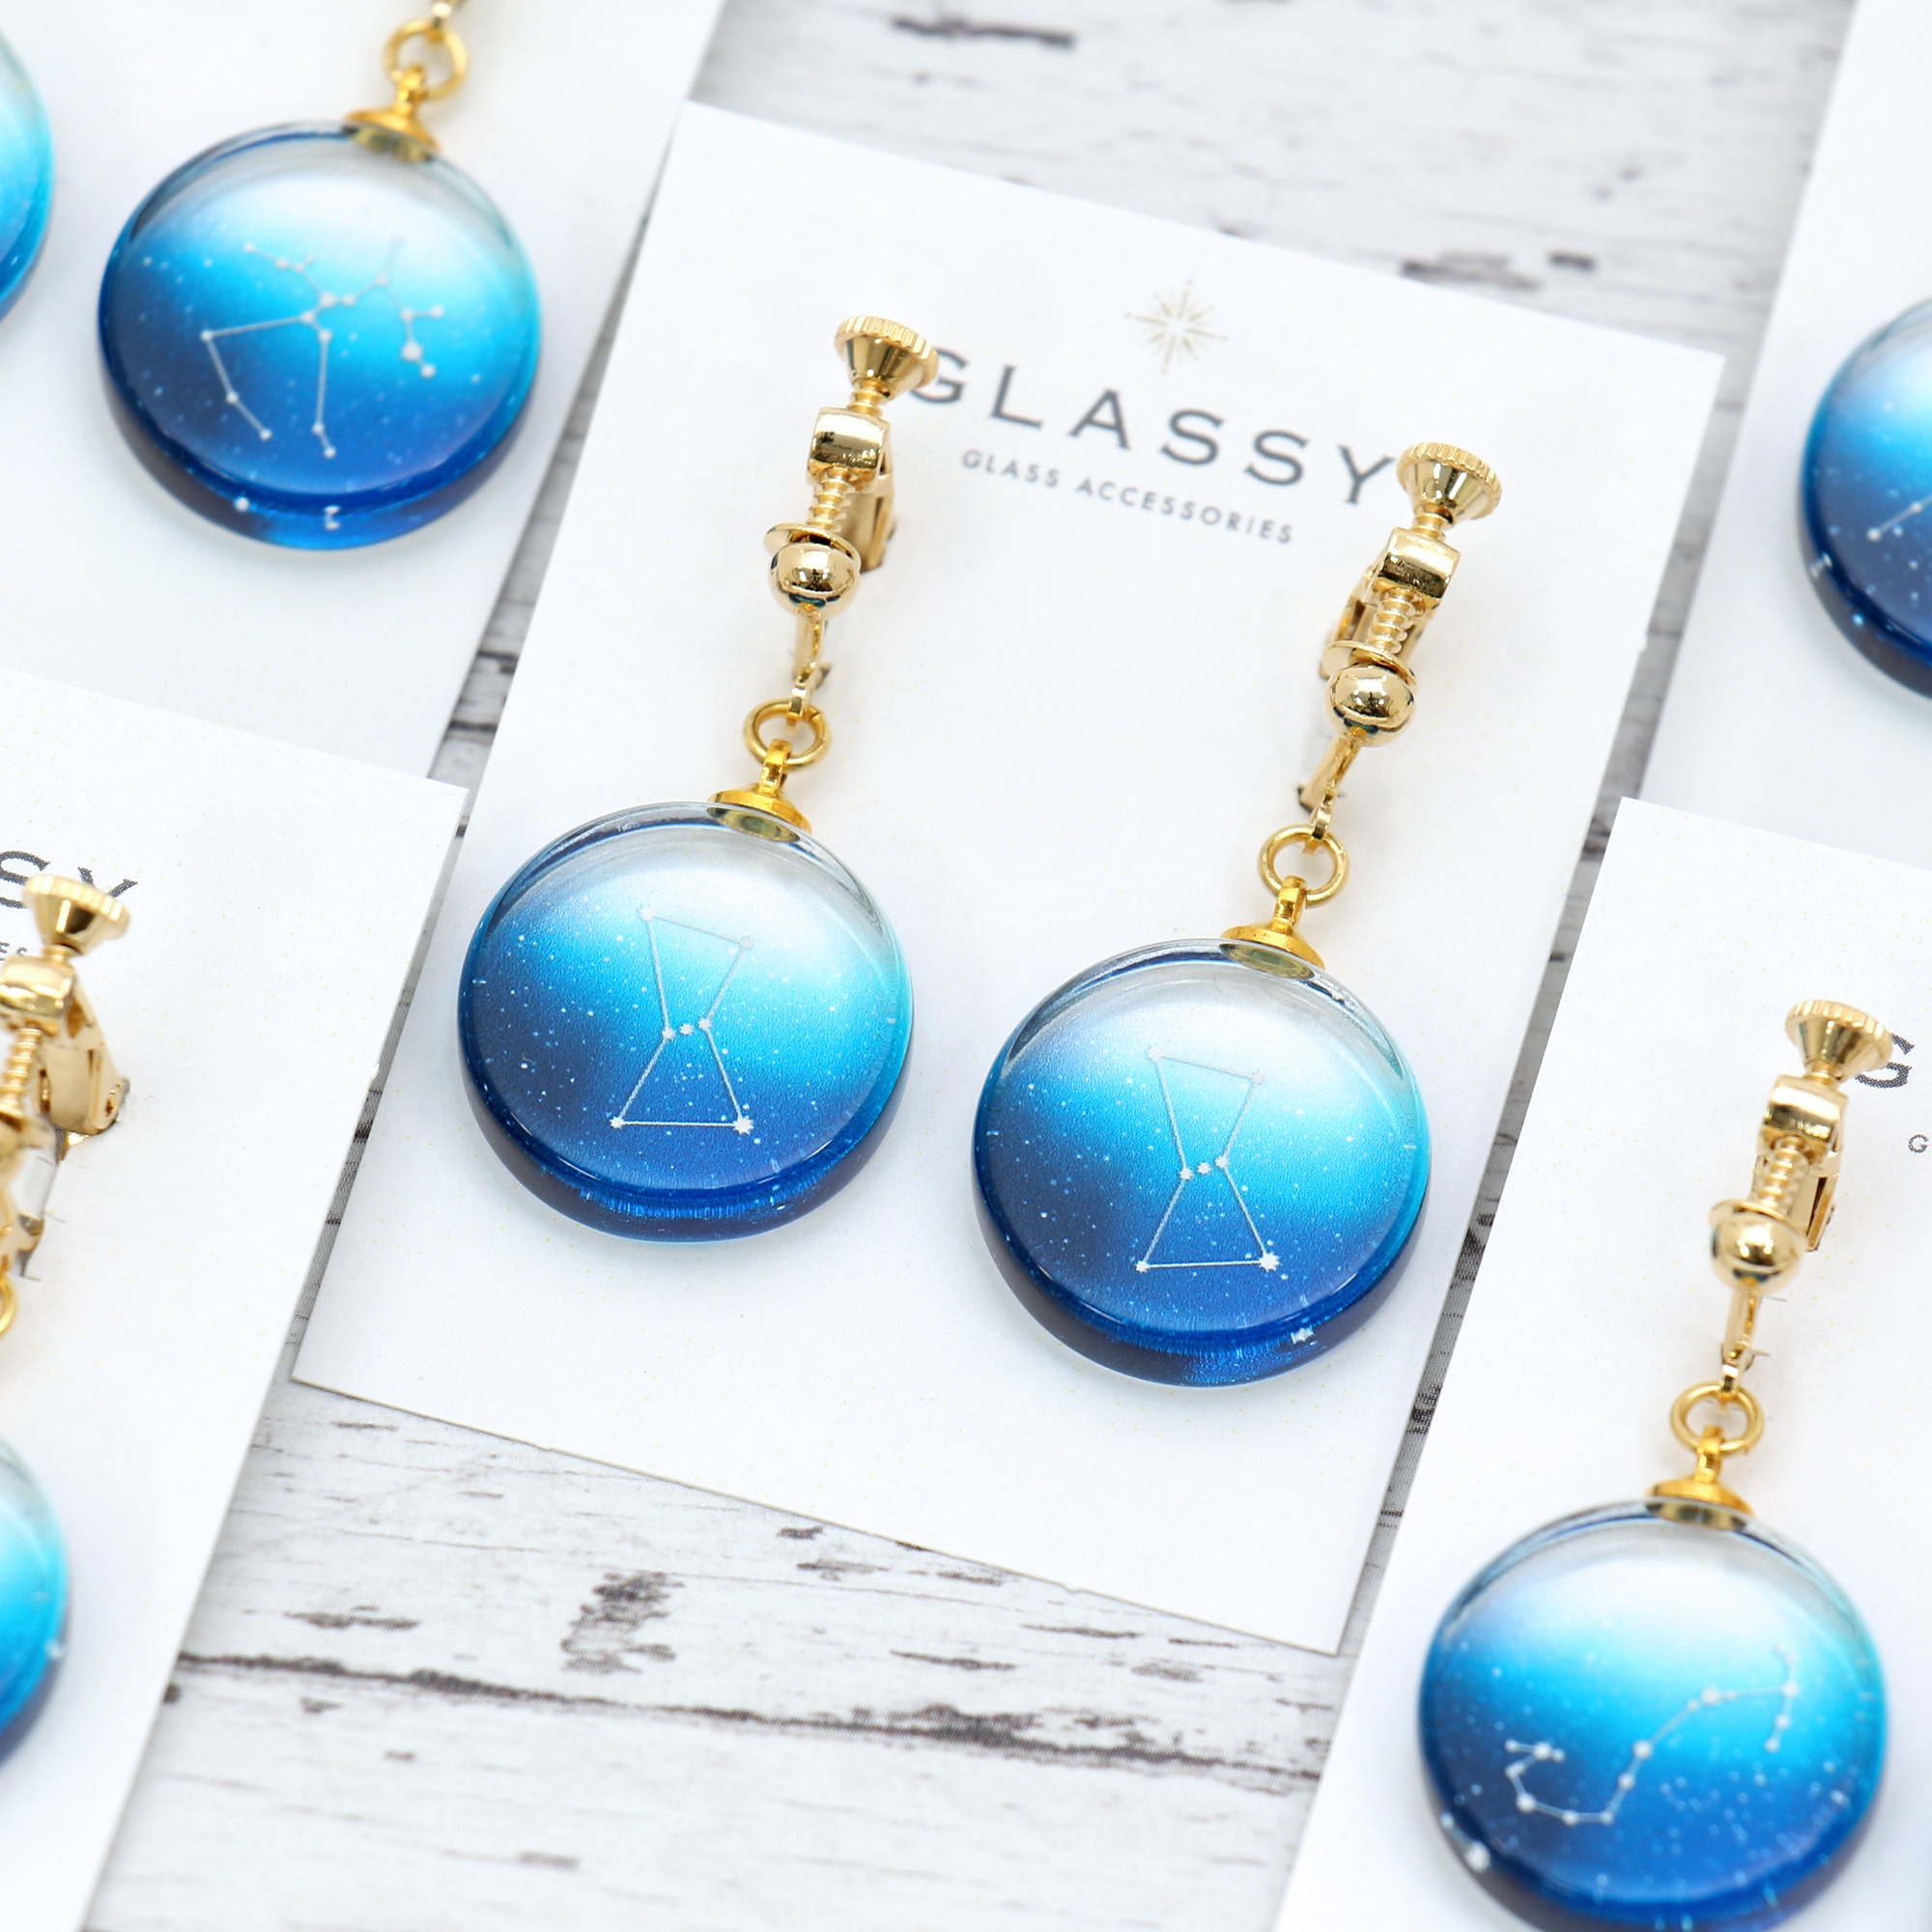 Glass accessories Earring CONSTELLATION Cassiopeia round shape